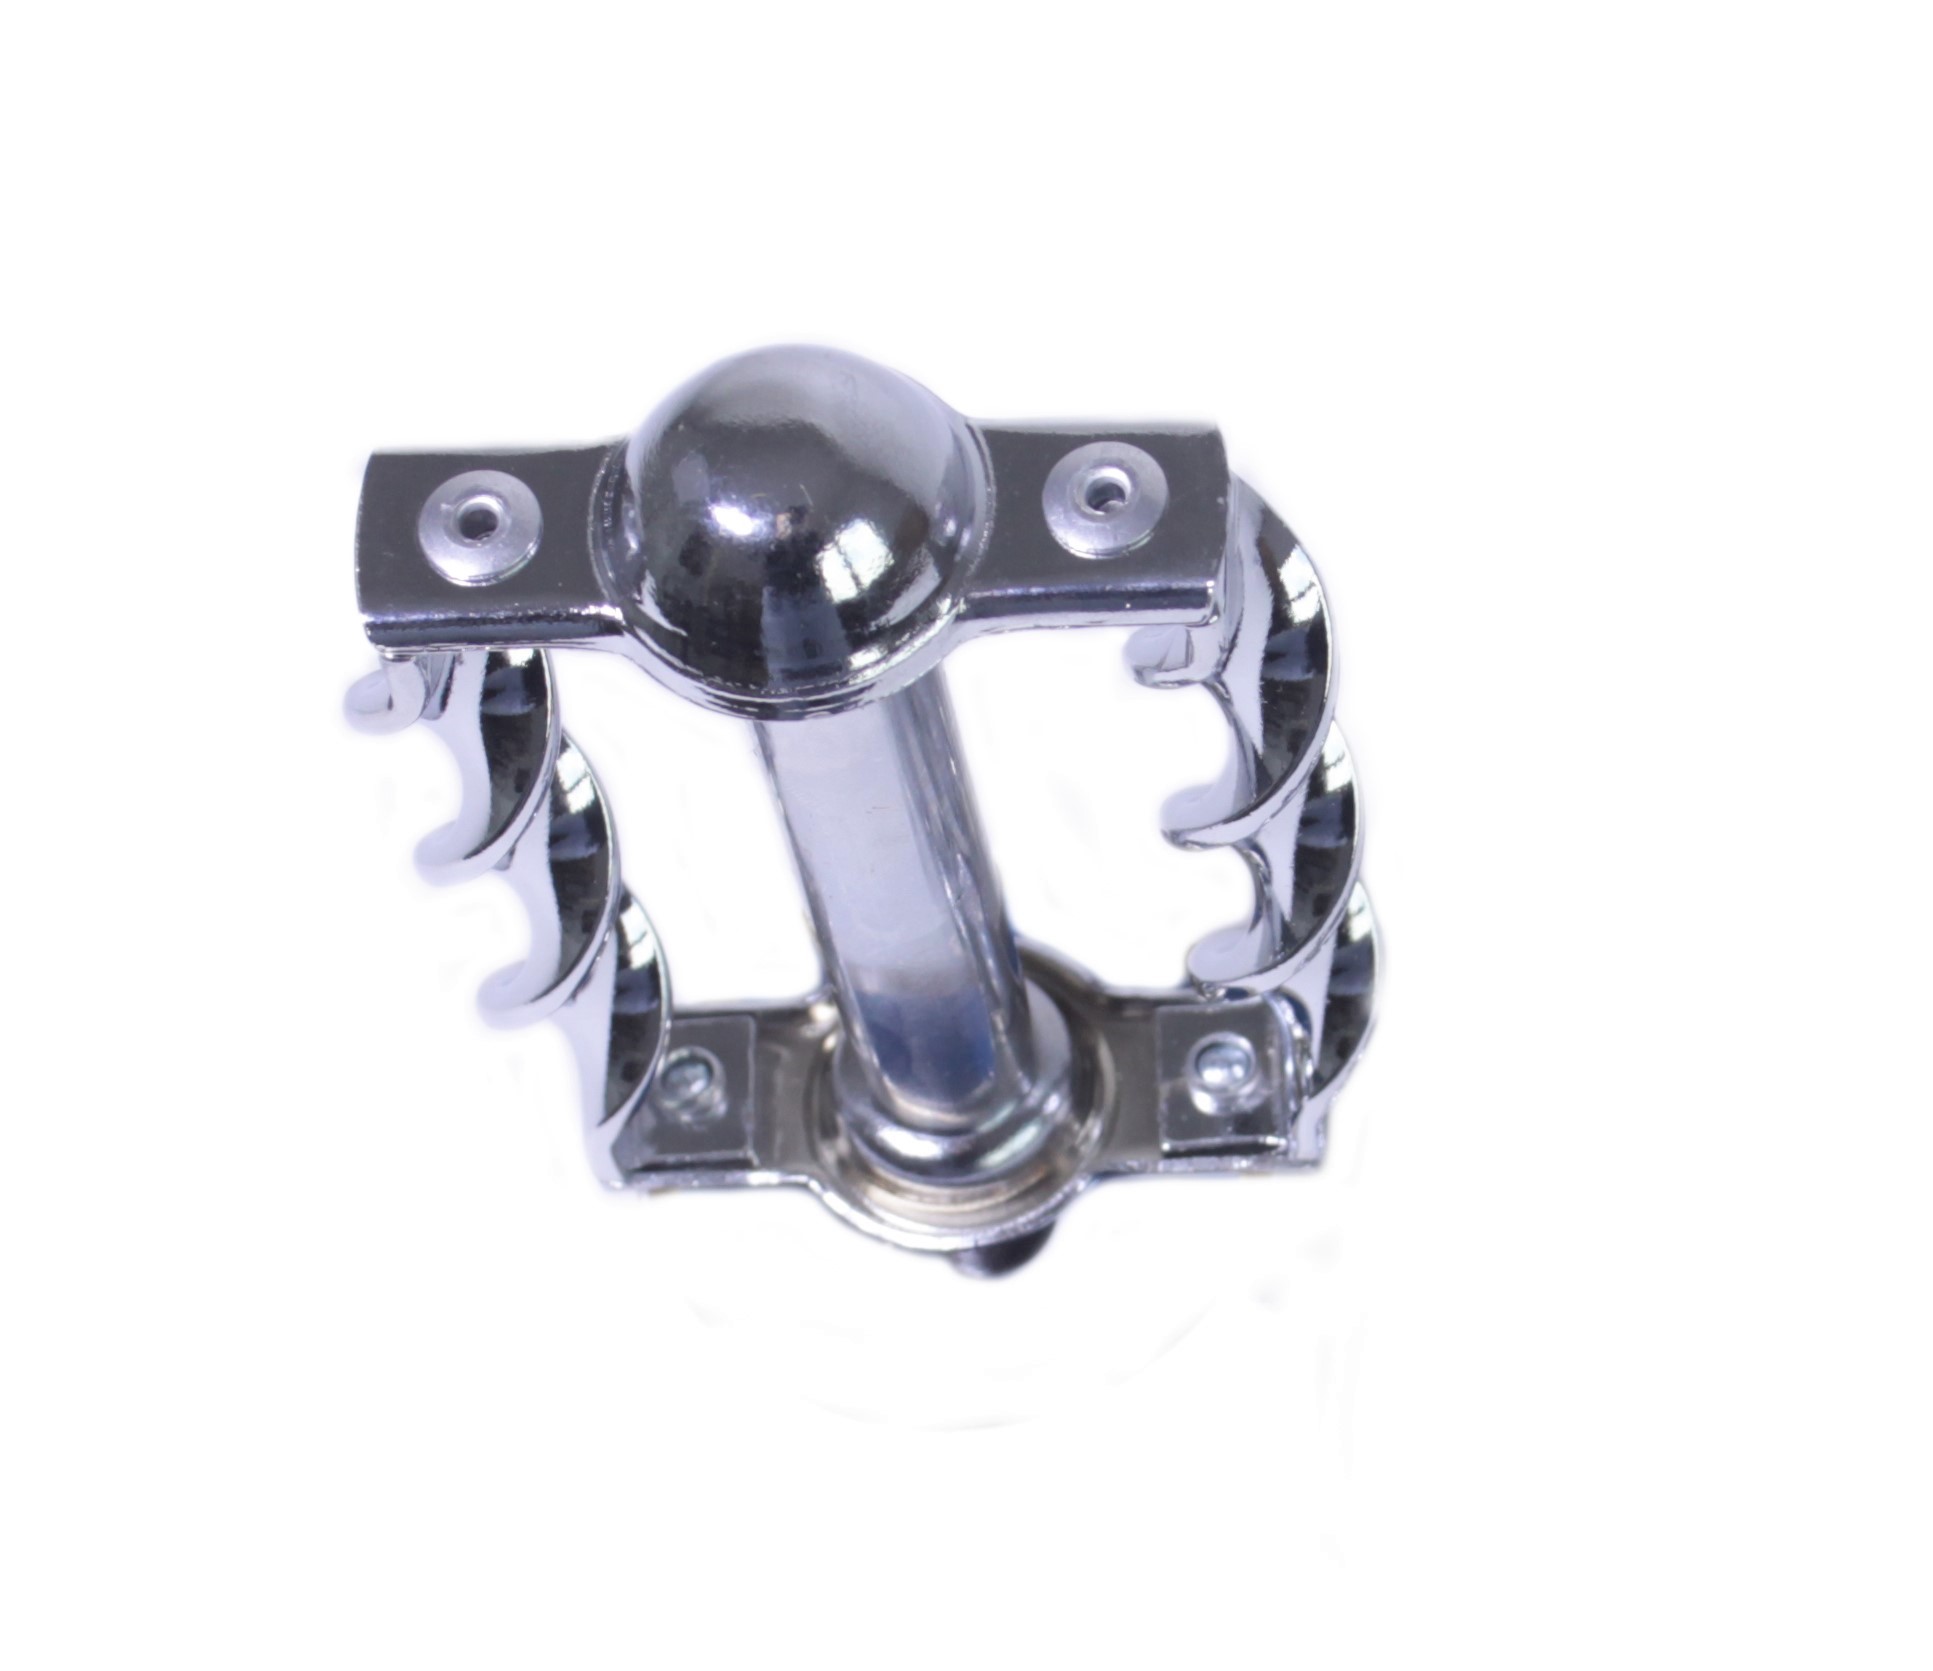 Lowrider Pedals, twisted, chrome 9/16 inch thread, CP, one pair